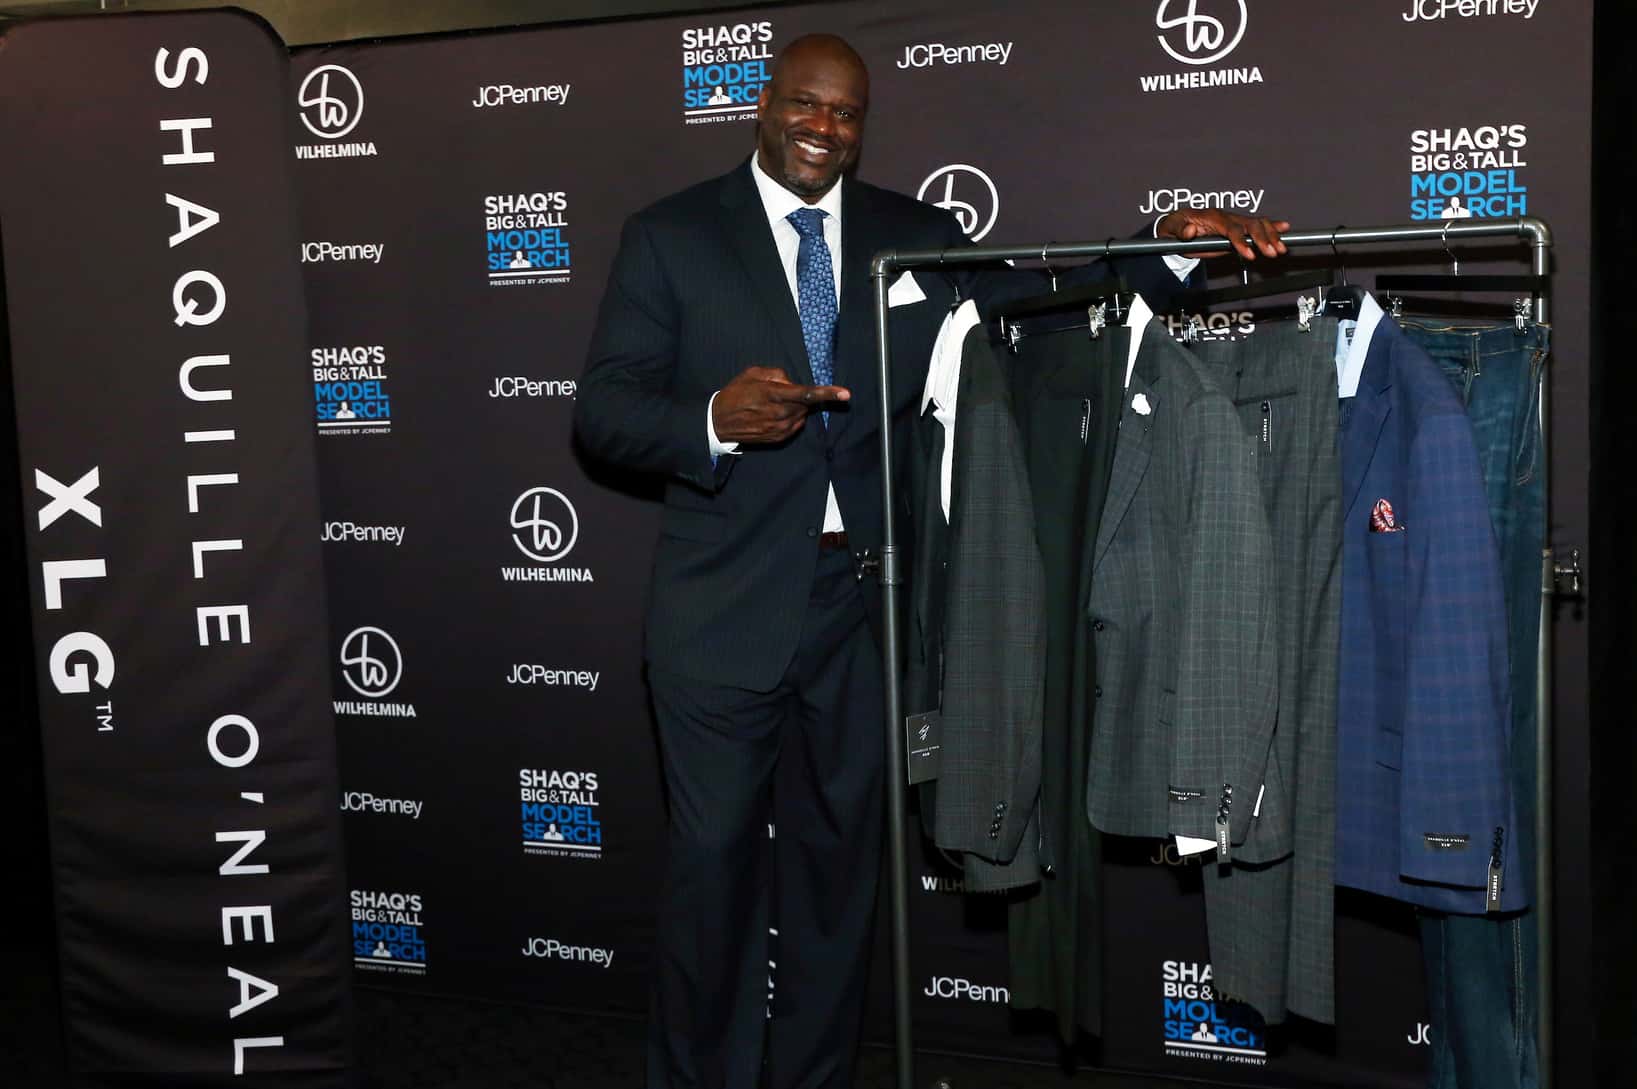 can confirm @shaq looks great in the #seakraken sweater 👀